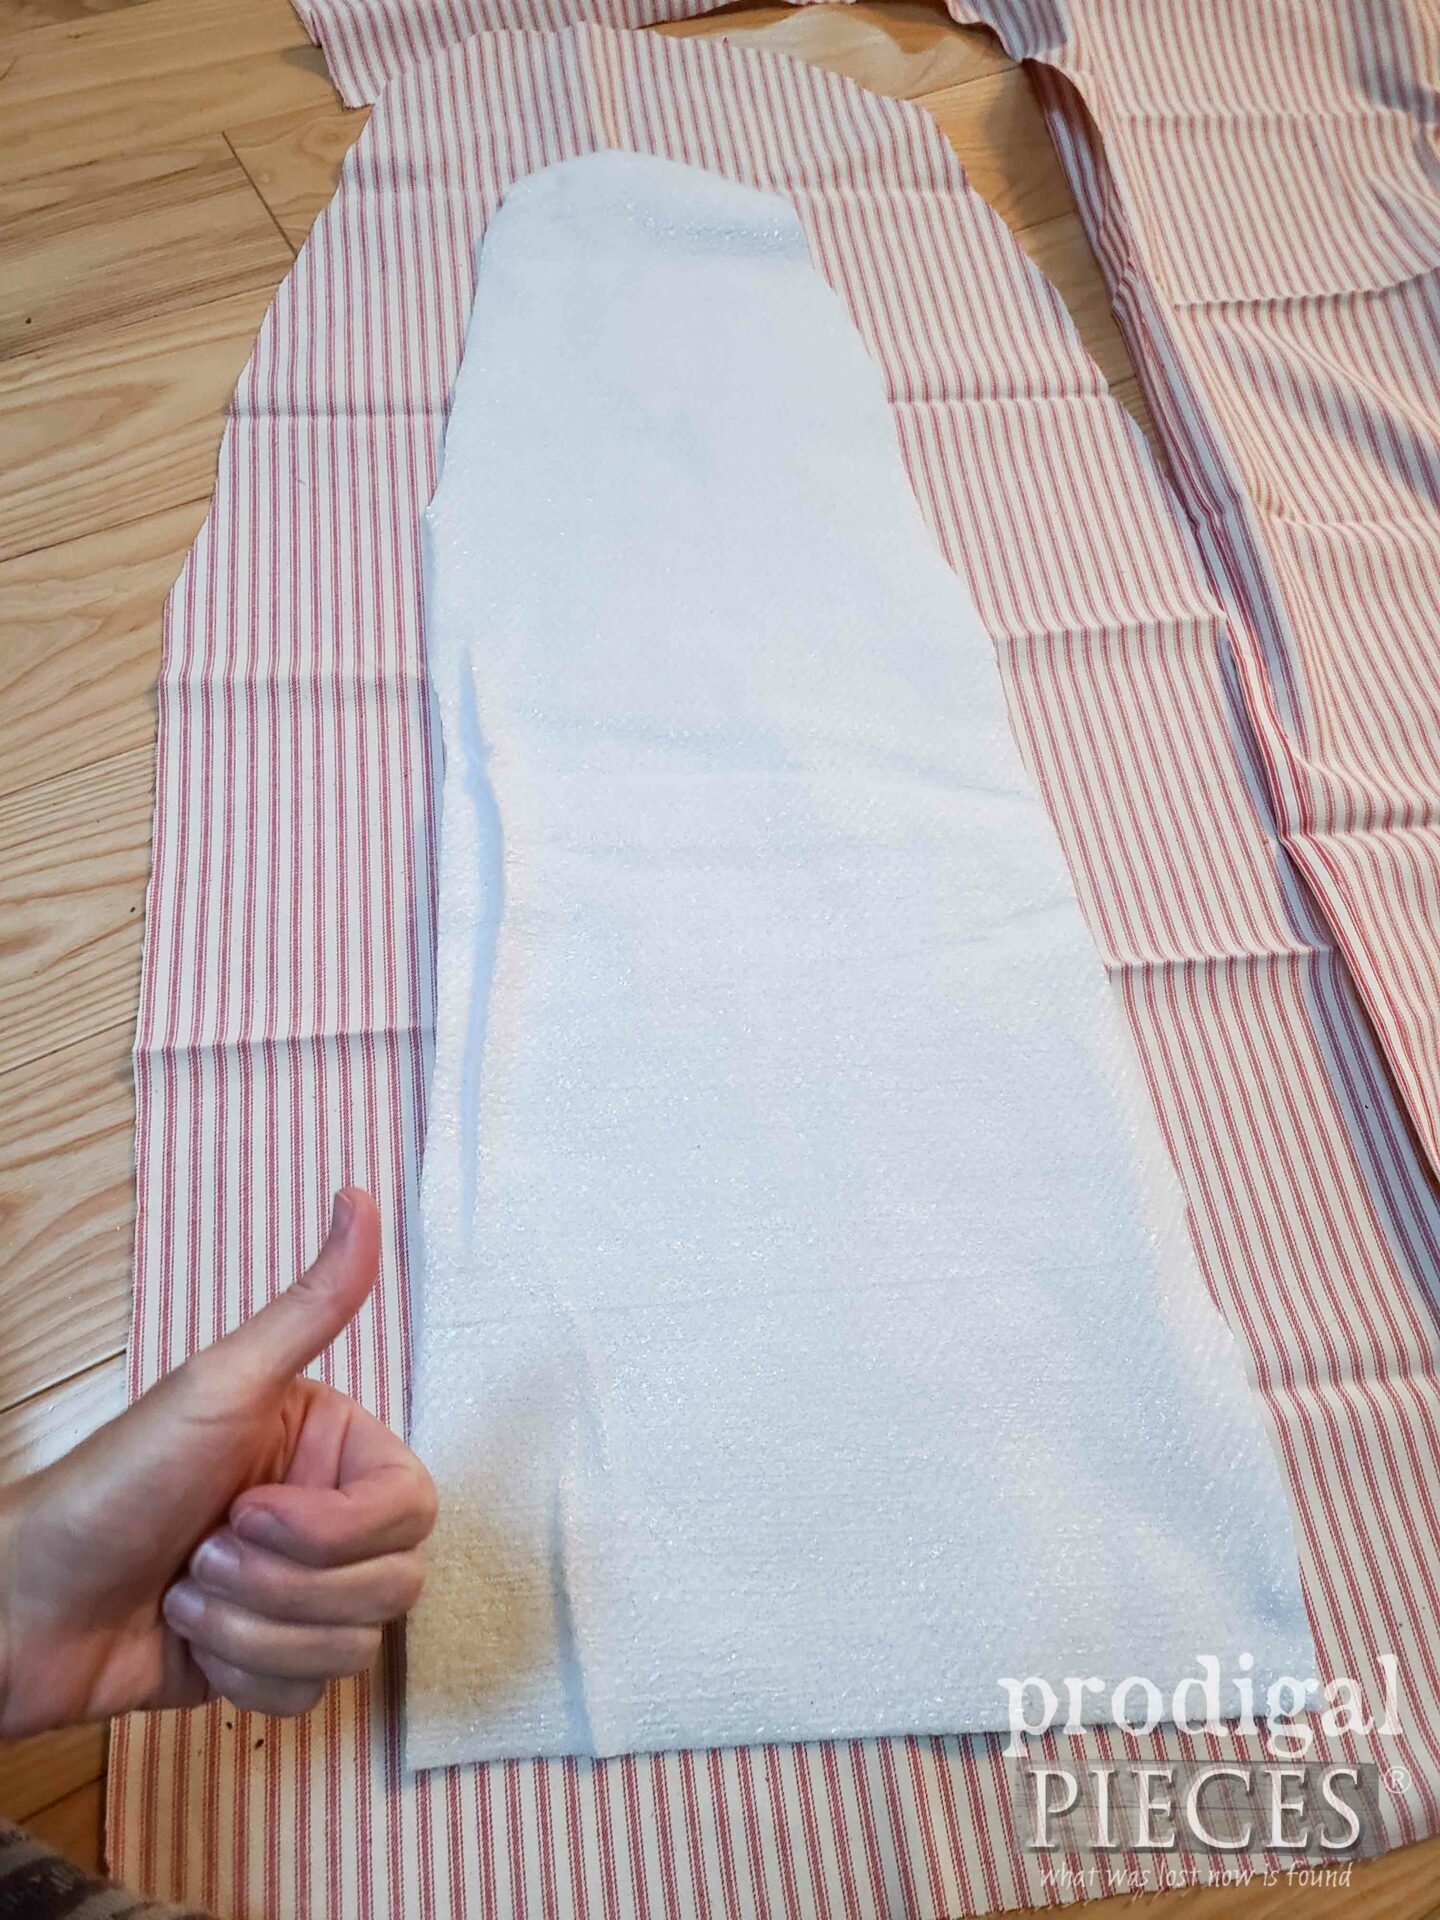 New DIY Ironing Board Cover with Red Ticking | prodigalpieces.com #prodigalpieces